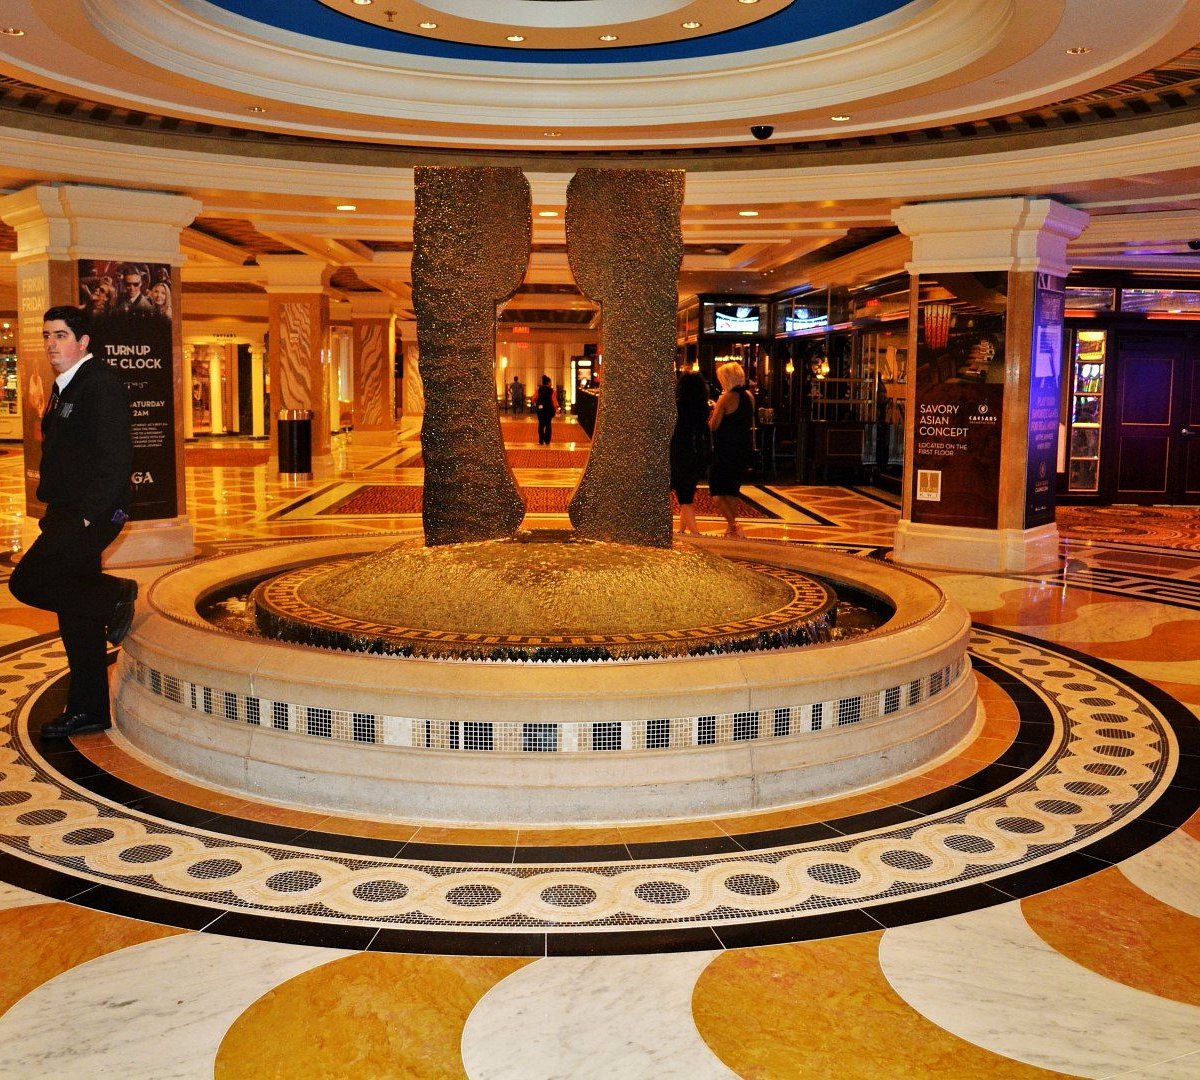 CAESARS ATLANTIC CITY CASINO All You Need to Know BEFORE You Go